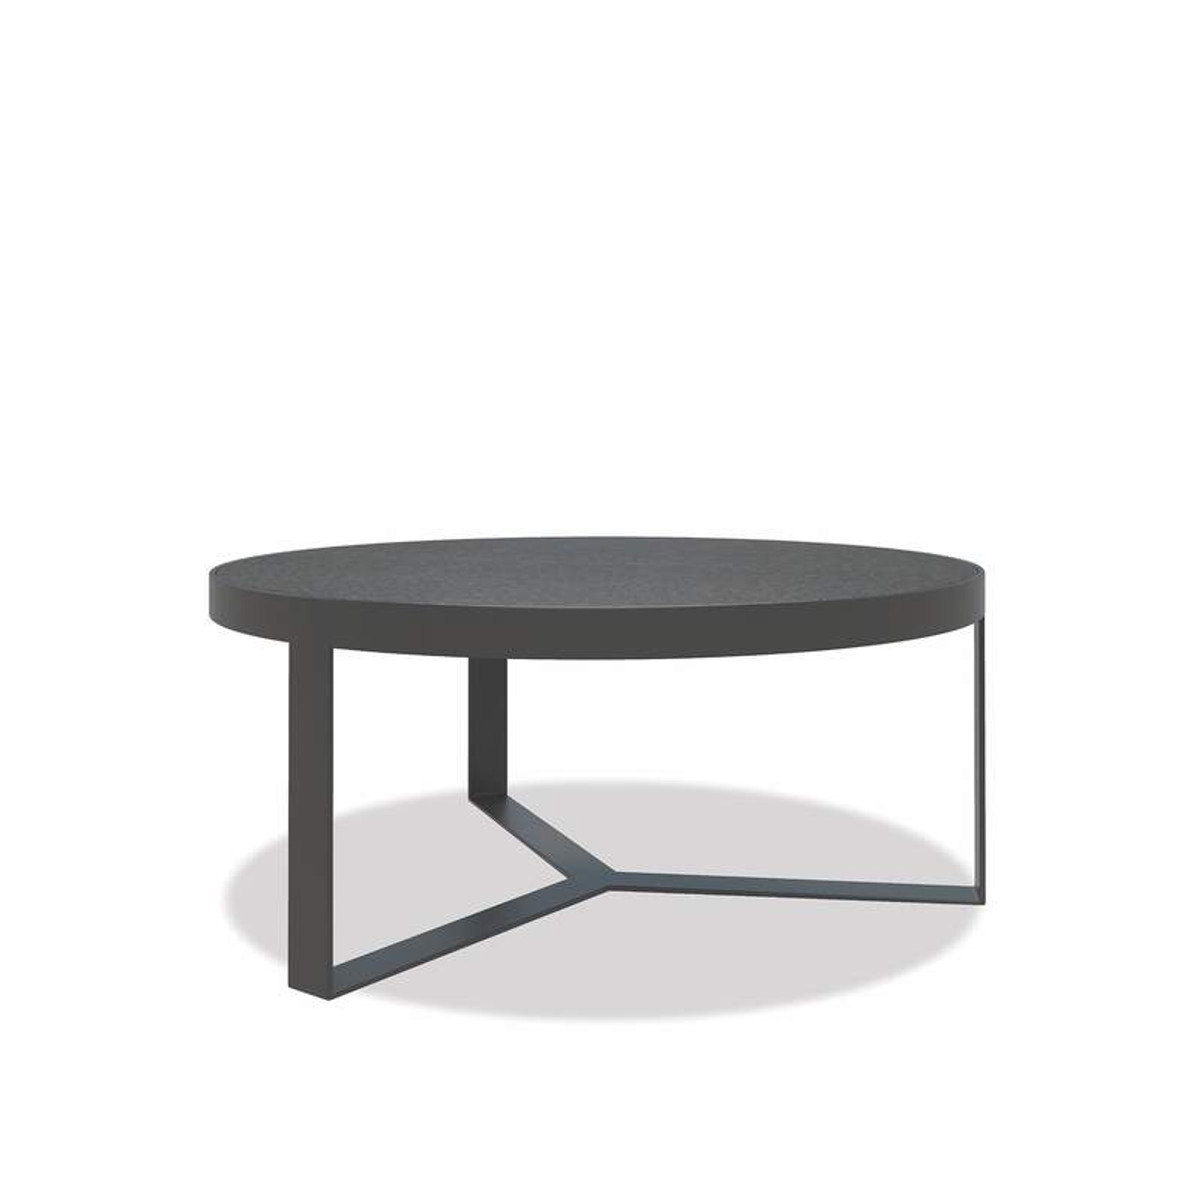 Bazaar 38" Polished Granite Round End Table